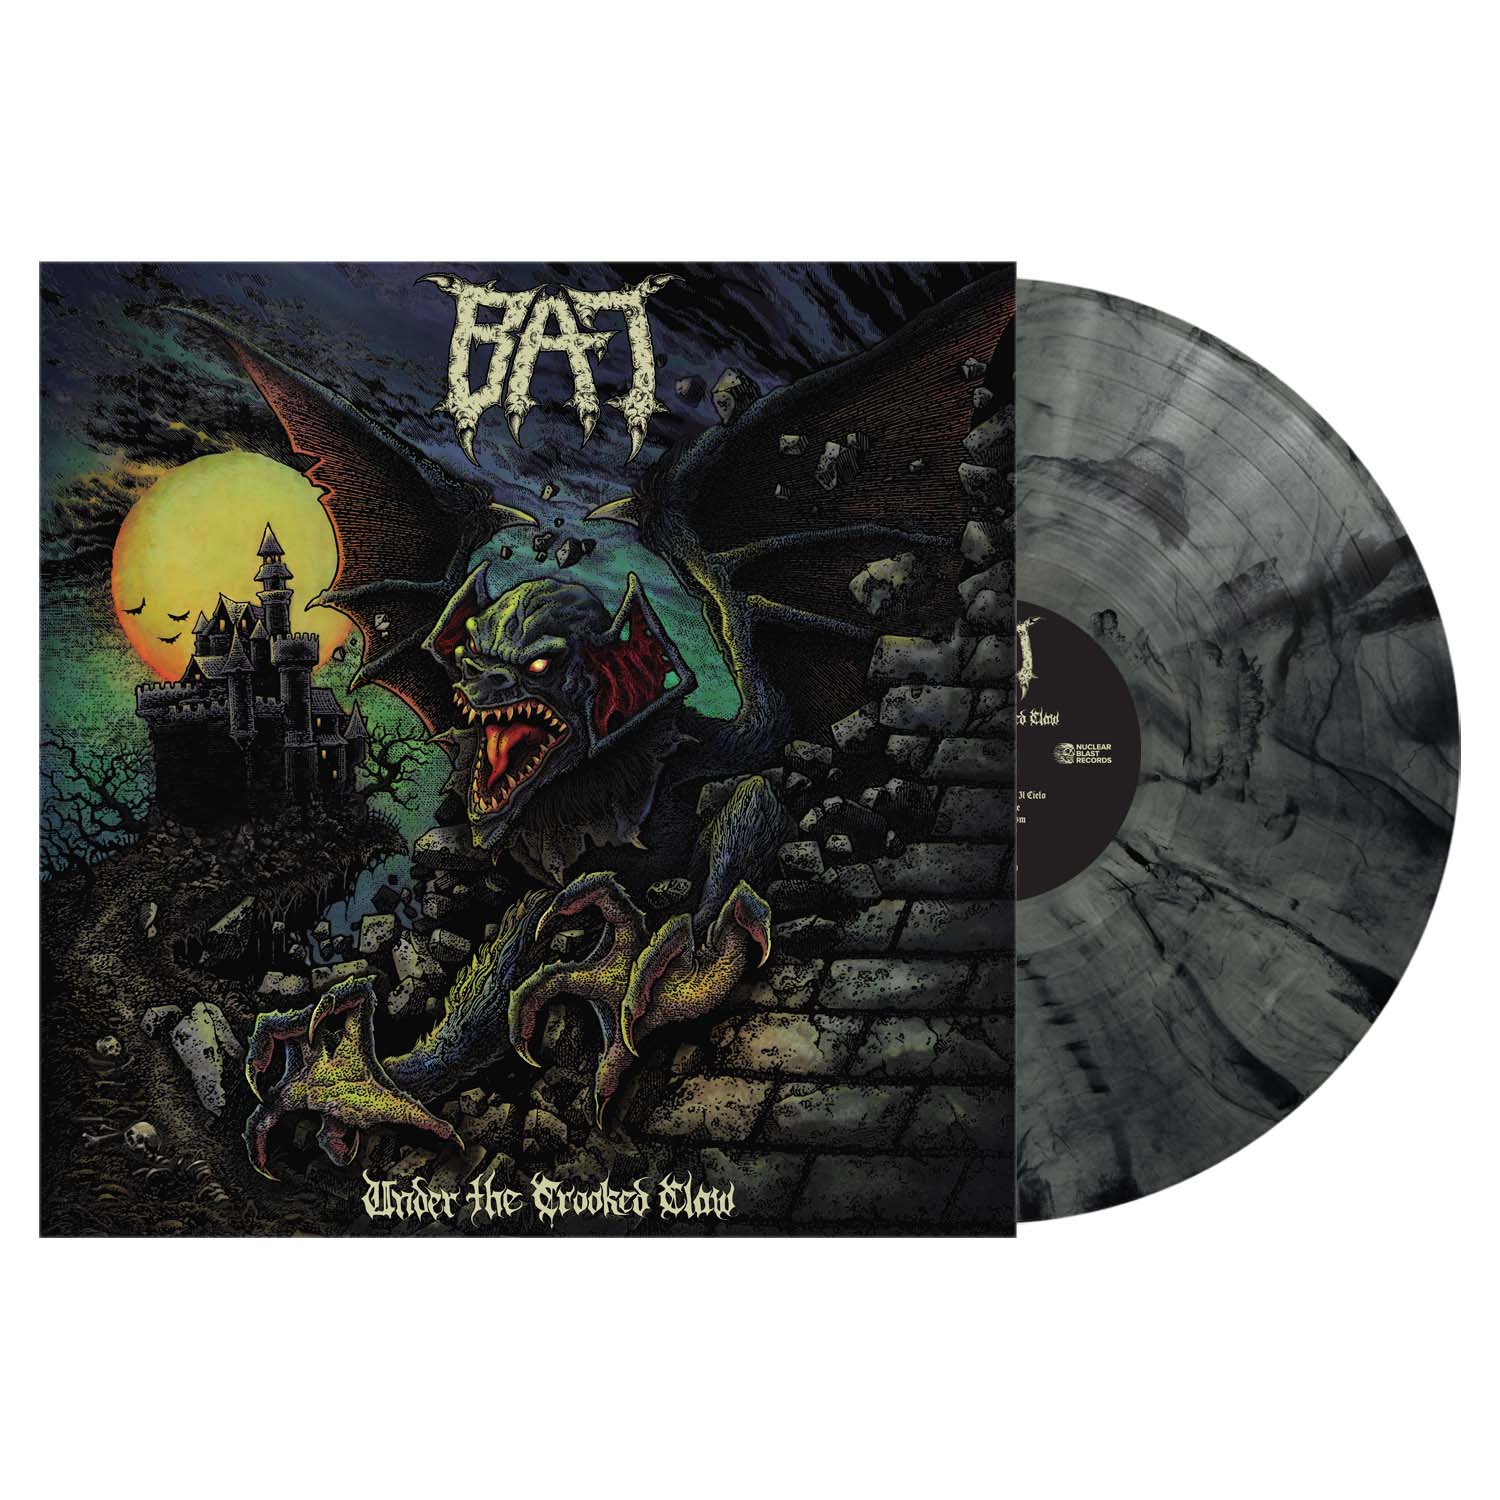 BAT "Under The Crooked Claw" Bottle Clear / Black Marbled Vinyl - PRE-ORDER